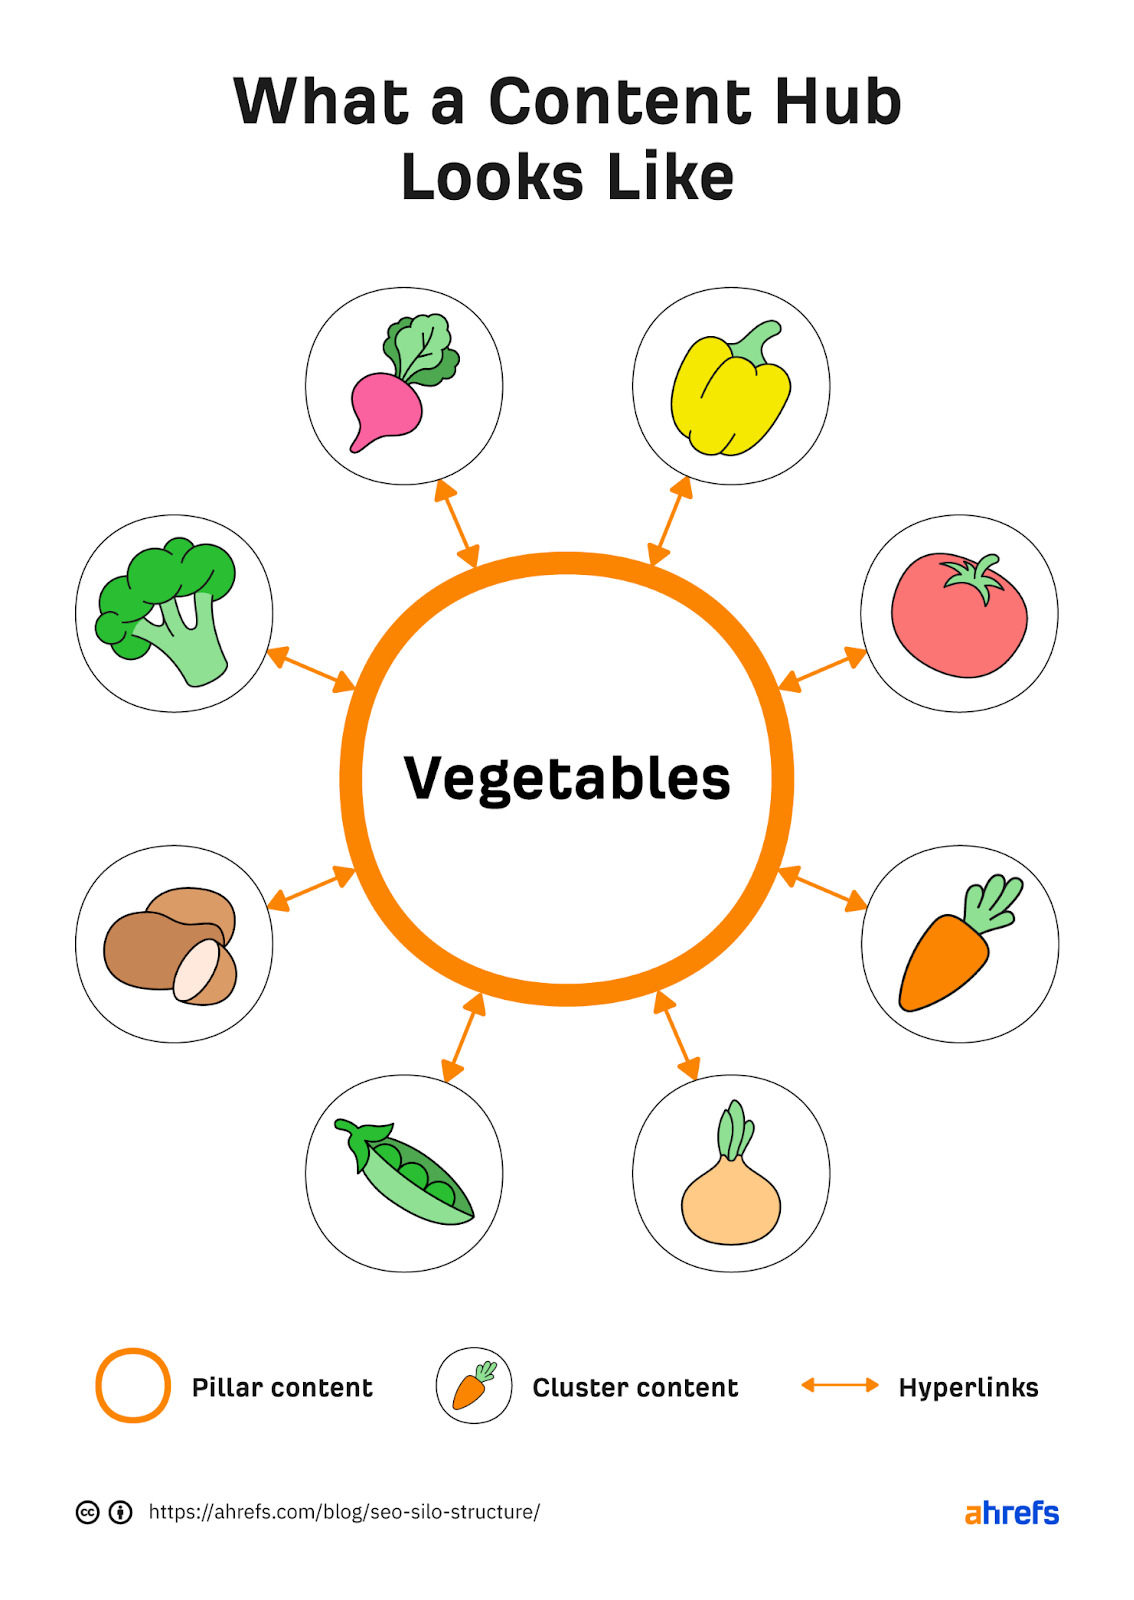 Flowchart of content hub: "vegetable" is in center and branches out to different vegetables like carrot, beetroot, etc 